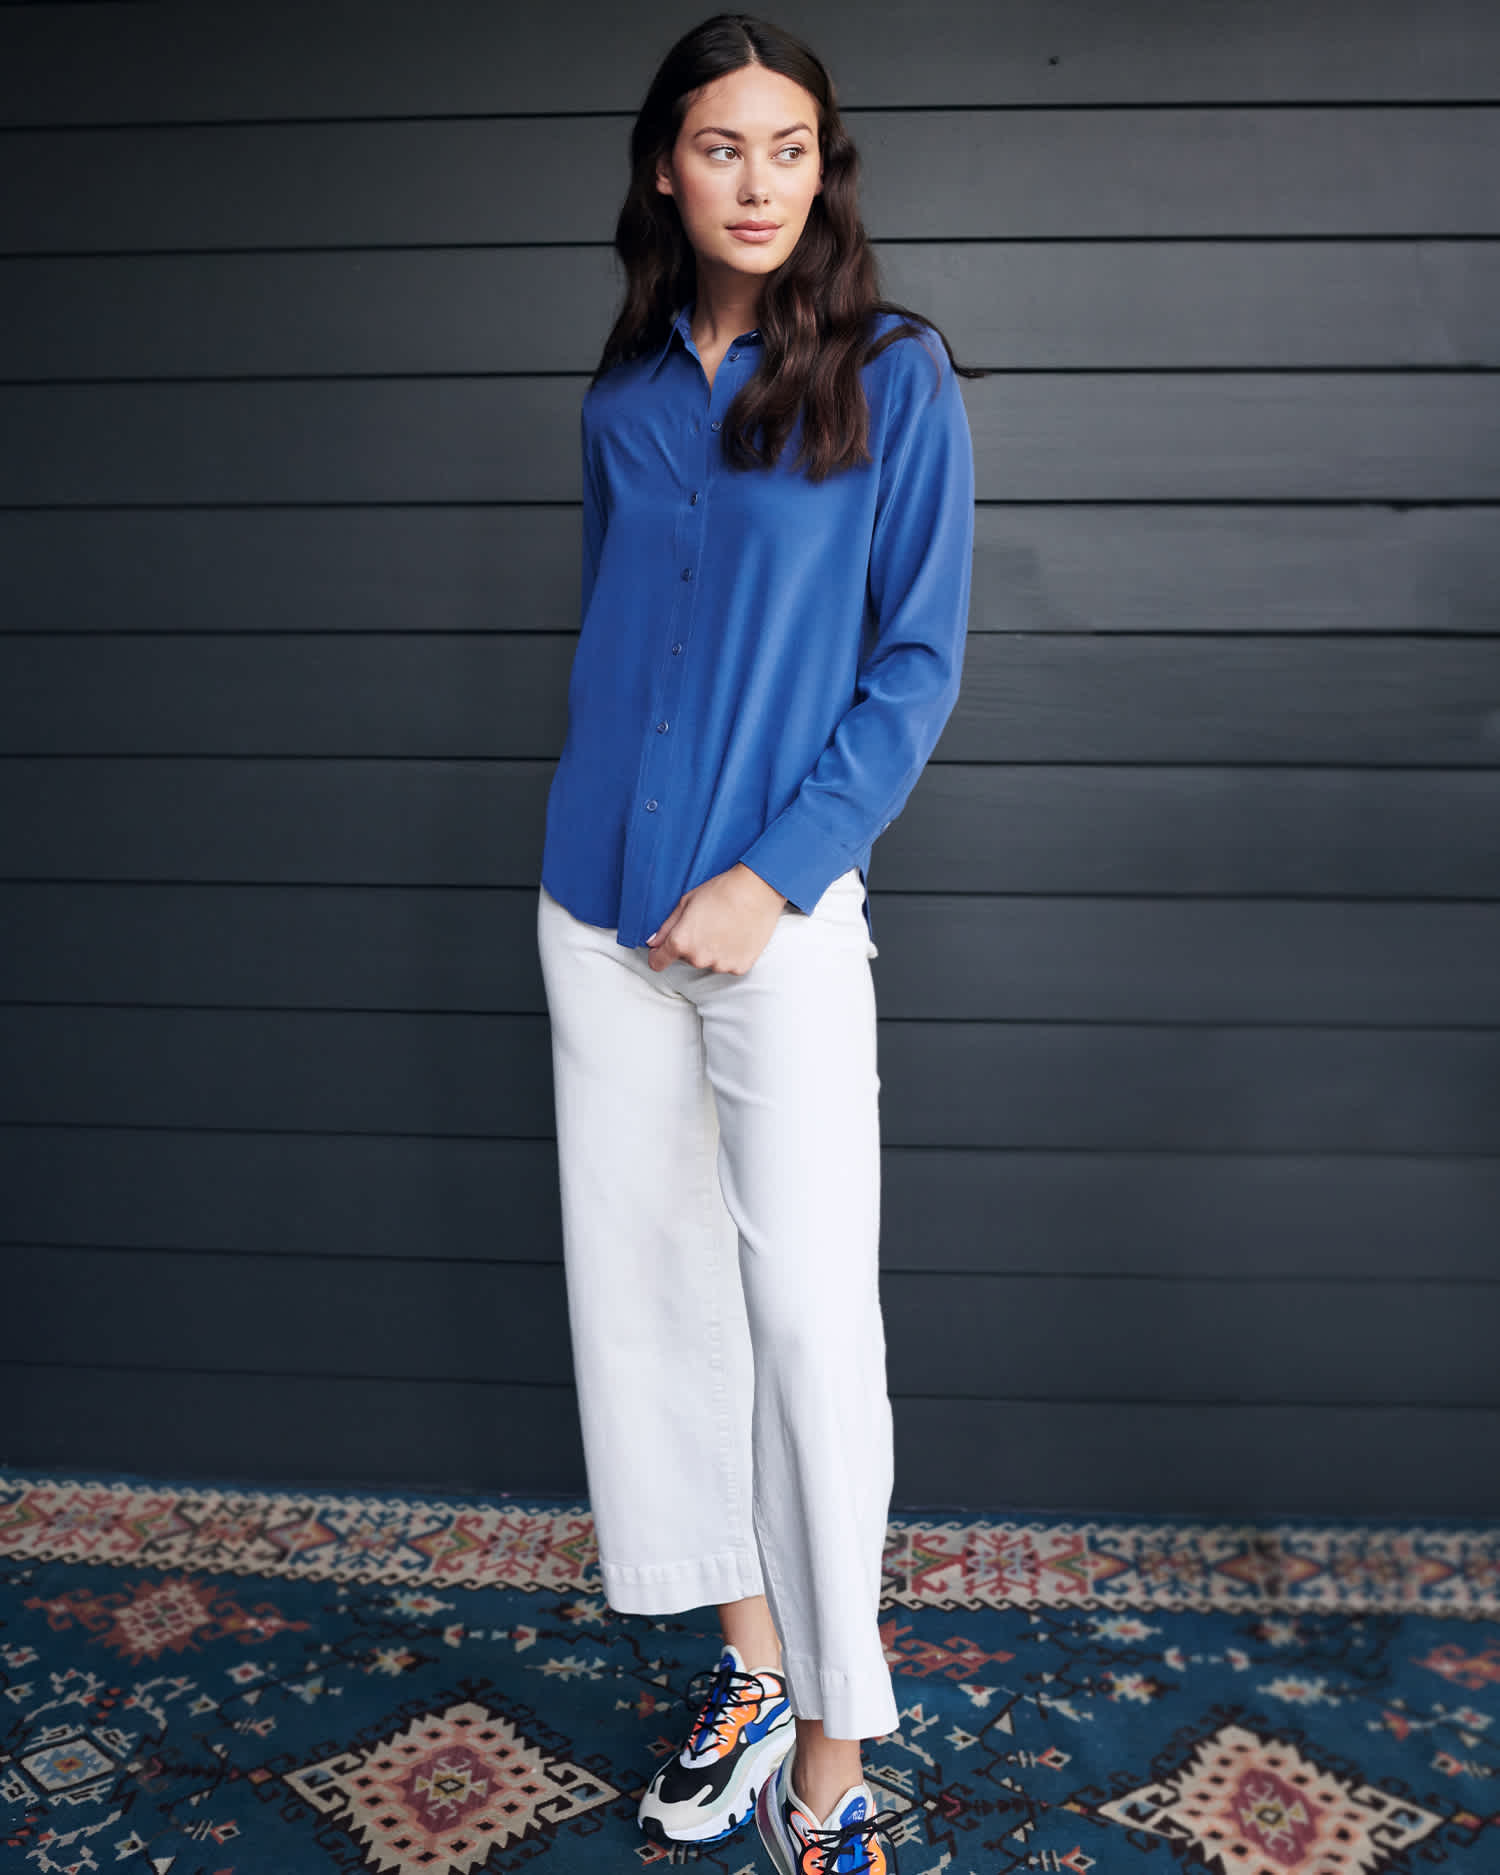 Woman wearing washable silk blouse in blue standing